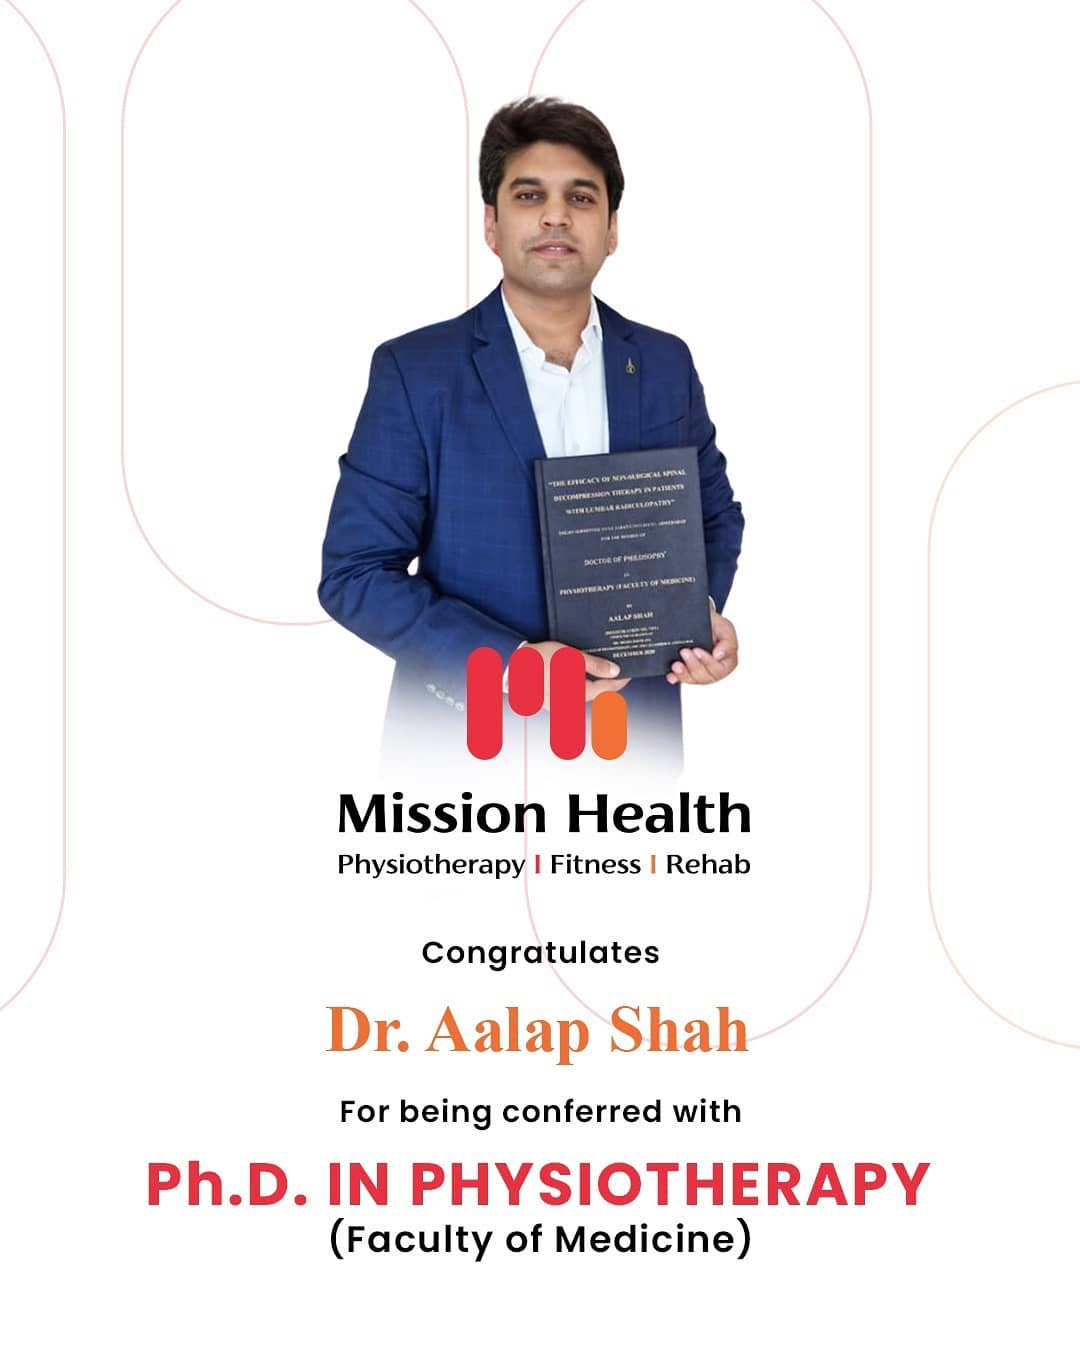 It is always the break-throughs that make us proud, stand out & sing aloud the hymns of achievements!
A new milestone has been achieved and a feather of accomplishment has been added to the crowning glory of world's finest & Asia's largest chain of physiotherapy, fitness and rehabilitation centers; Mission Health.

Mission Health congratulates its brightest shining star; Dr. Aalap Shah for soaring high and touching the horizons with the one of its kind research in Spine Rehab that will be making the entire nation proud. We extend our choicest greetings to the man who made it possible; Dr. Aalap Shah by conducting the path-breaking study in the arena of non invasive management of SLIPPED DISC, LUMBAR CANAL STENOSIS and SCIATICA with the mission to establish non-surgical Spine Treatment options as the 1st line of management for treatment of Slipped Disc & Sciatica.

The thousands of hours invested by Dr. Aalap Shah will add an immense amount of value & evidence to International Data & Global Research and hence we wish to never fall short of adjectives while congratulating him for this amazing feat

#DrAalapShah #MissionAccomplished #PathBreakingStudy #PHDLife #PHDStudy #NonSurgicalSpineTreatment #SlippedDisc #MightyMission #ProudMoment #MilestoneAchieved #HistoryMade #ScholarsOfIndia #MissionHealth #CentreOfExcellence